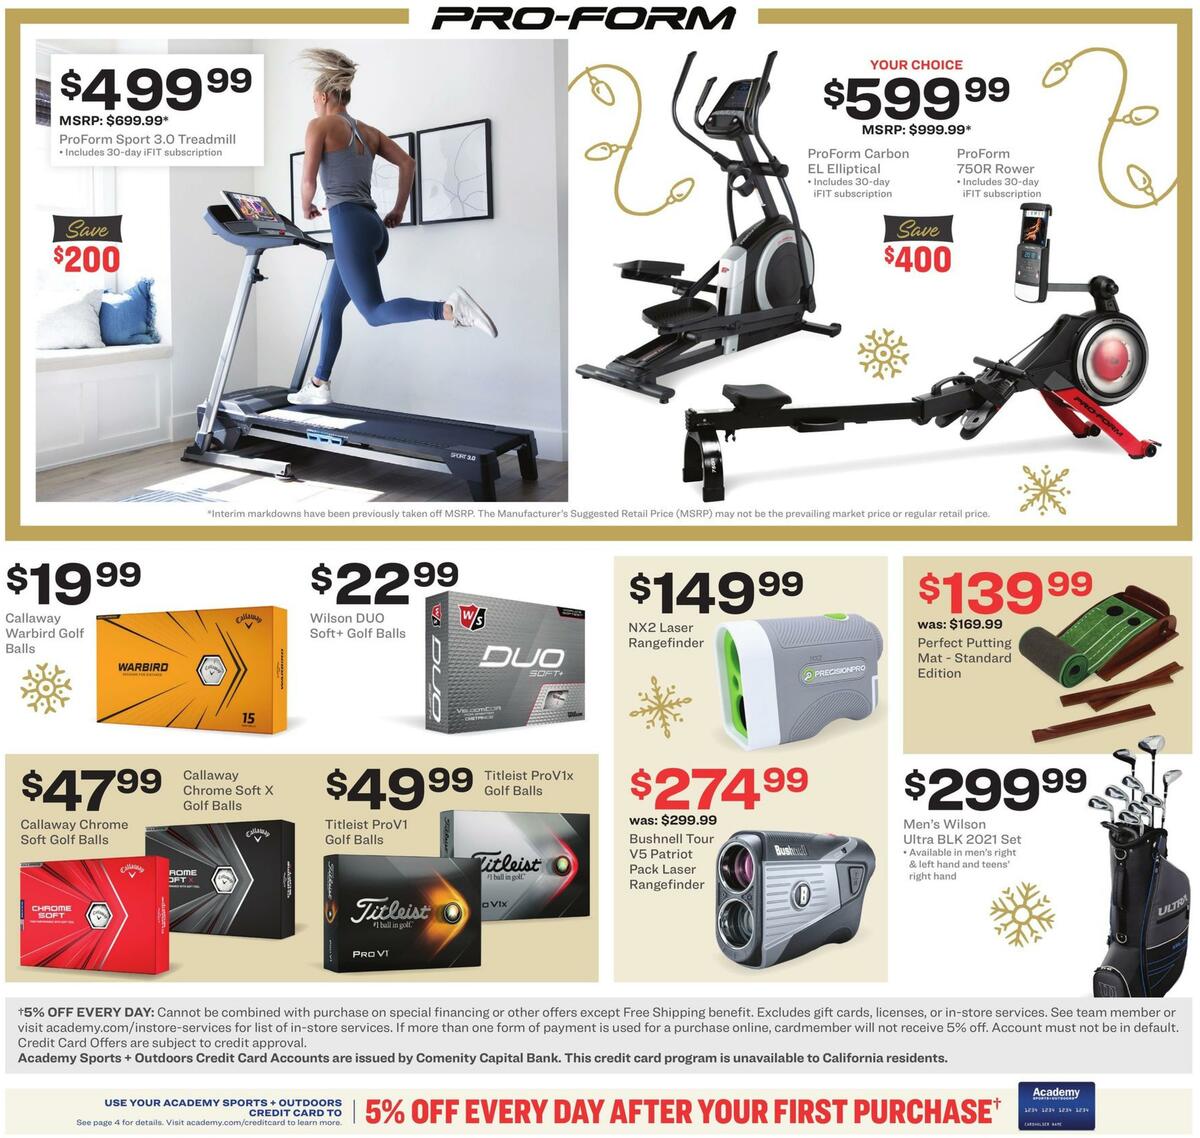 Academy Sports + Outdoors Weekly Ad from December 6